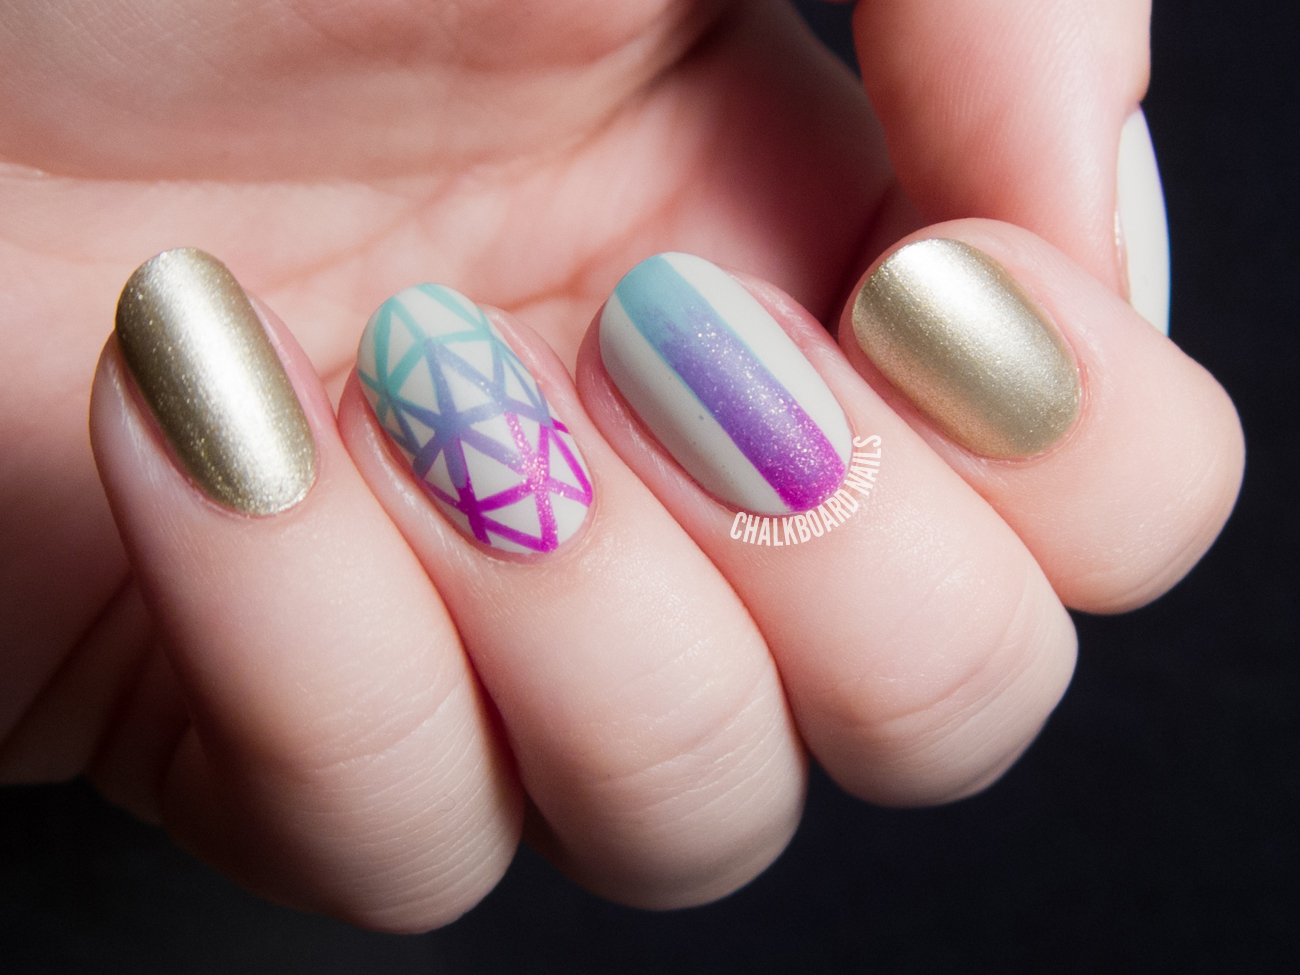 10. Gradient Oval Nail Art on Tumblr - wide 2